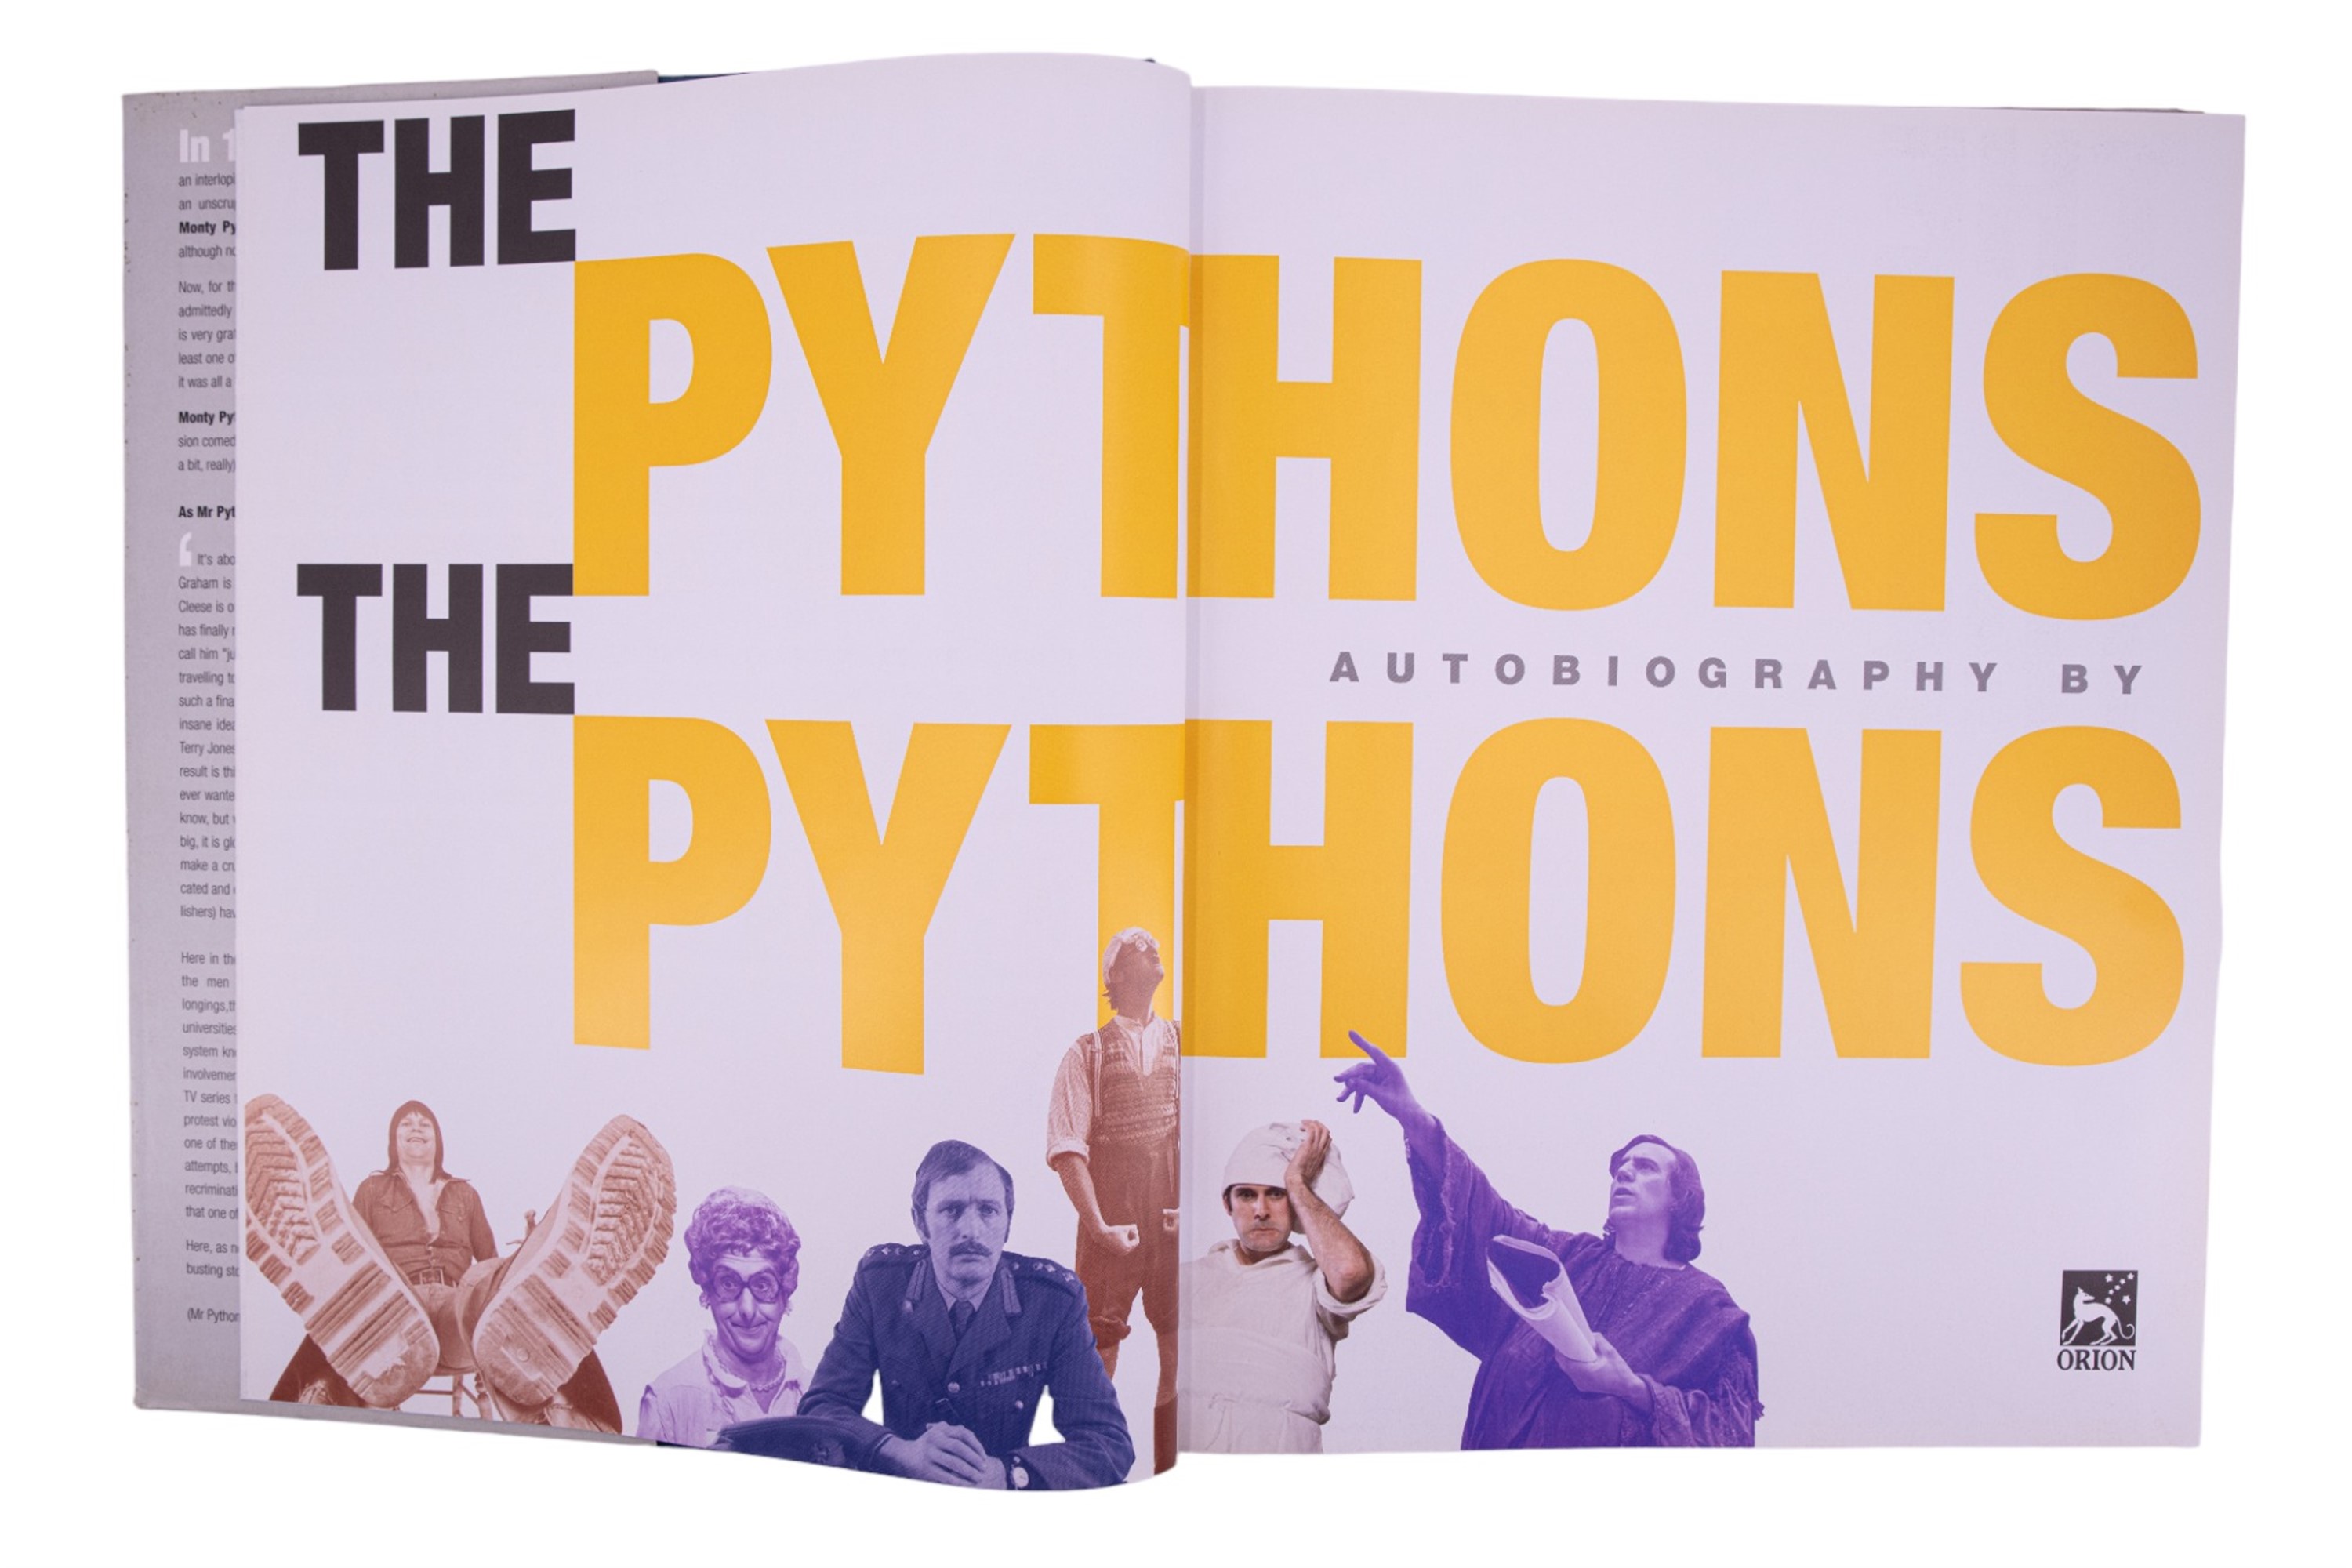 Monty Python, "The Pythons. Autobiography by The Pythons", London, Orion Books, 2003 - Image 2 of 3